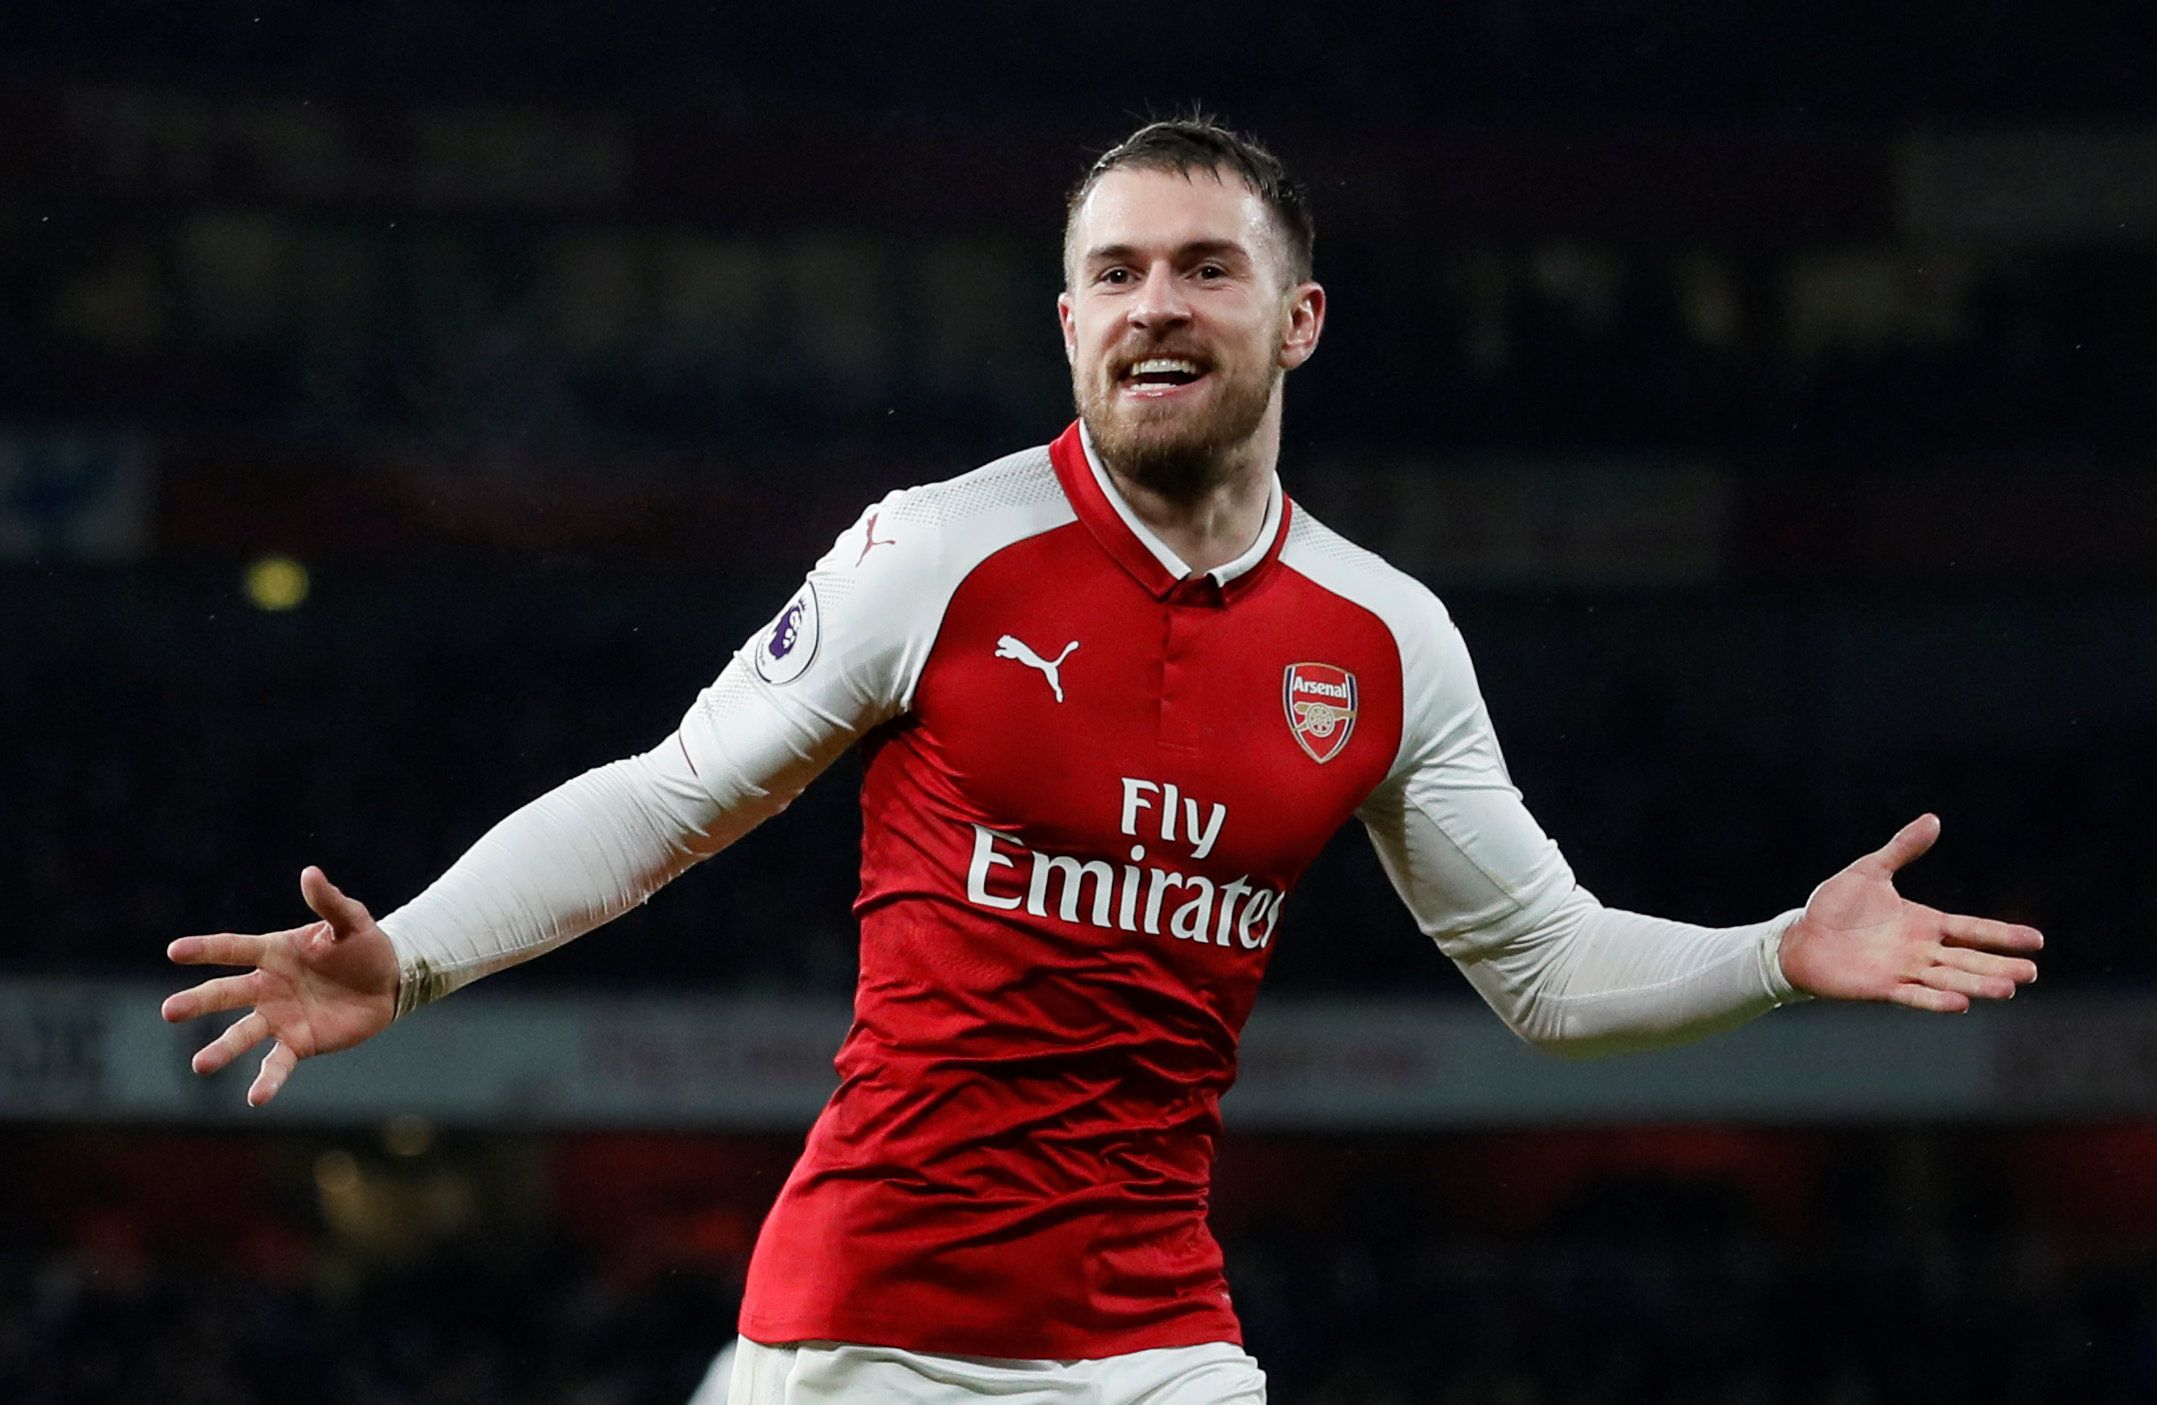 Soccer Football - Premier League - Arsenal vs Everton - Emirates Stadium, London, Britain - February 3, 2018   Arsenal's Aaron Ramsey celebrates scoring their fifth goal to complete his hat-trick    REUTERS/David Klein    EDITORIAL USE ONLY. No use with unauthorized audio, video, data, fixture lists, club/league logos or 